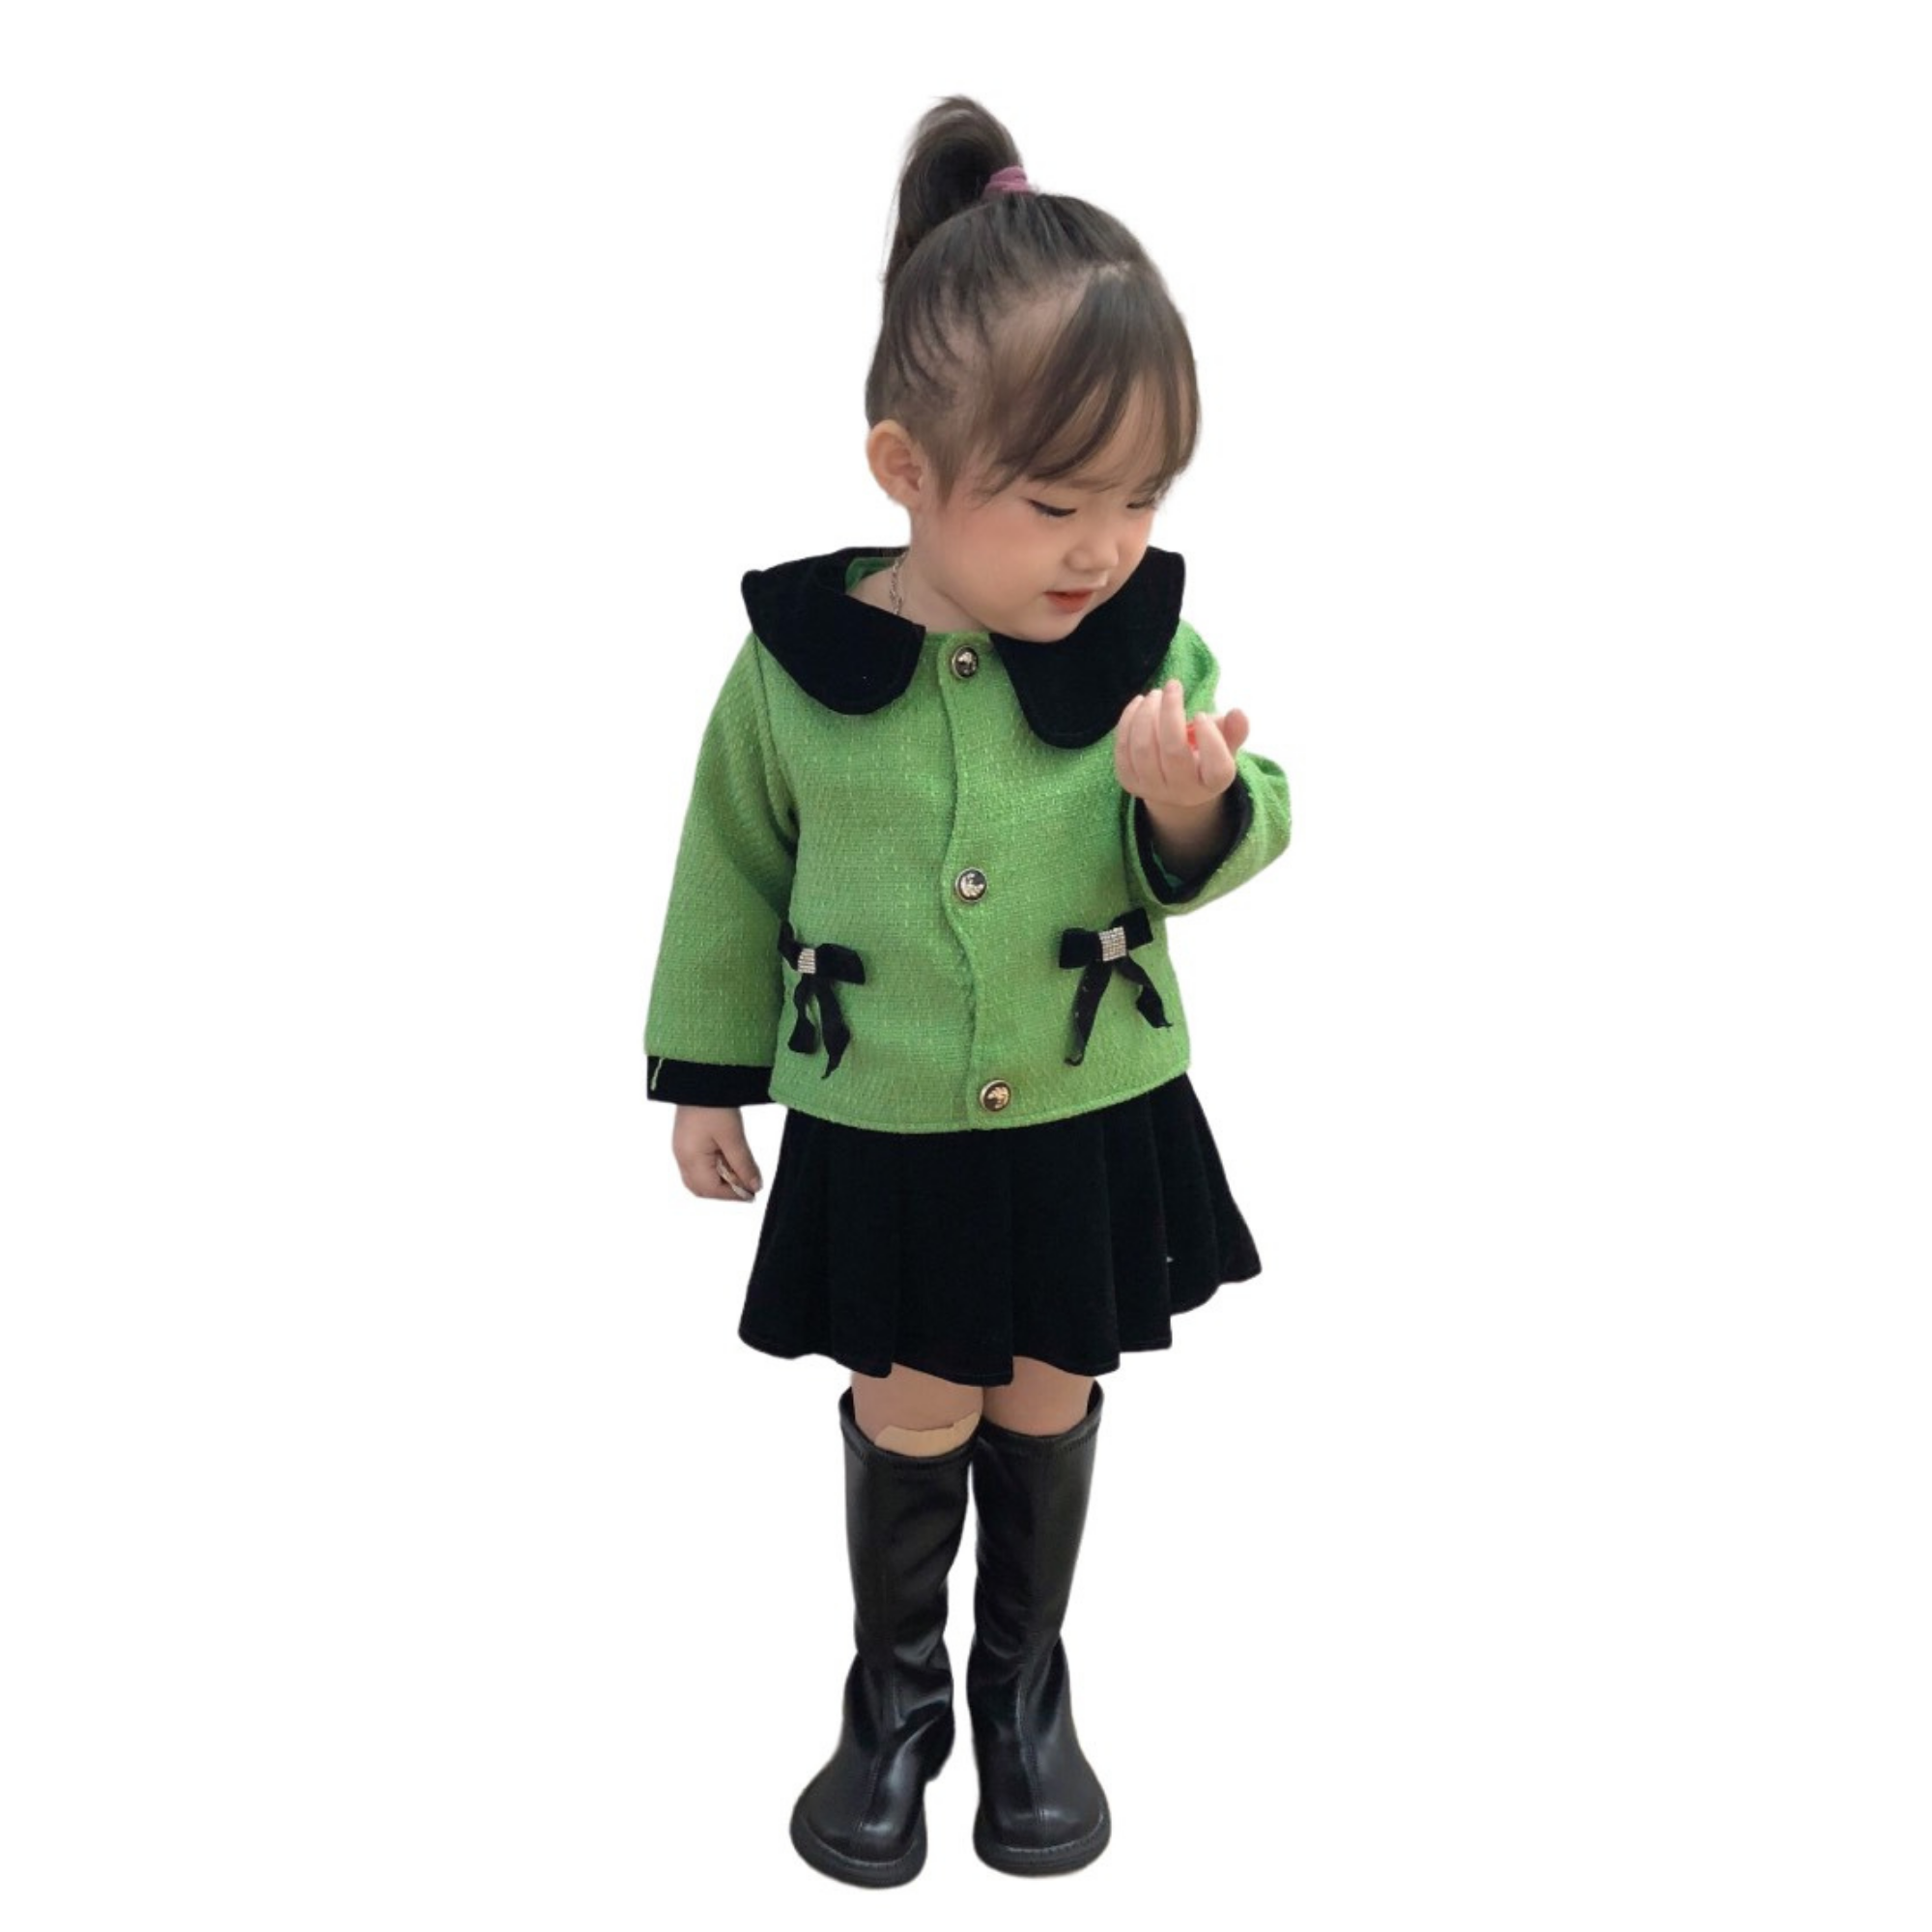 Clothes For Kids High Quality Natural Dresses Casual Each One In Opp Bag Made In Vietnam Manufacturer 6